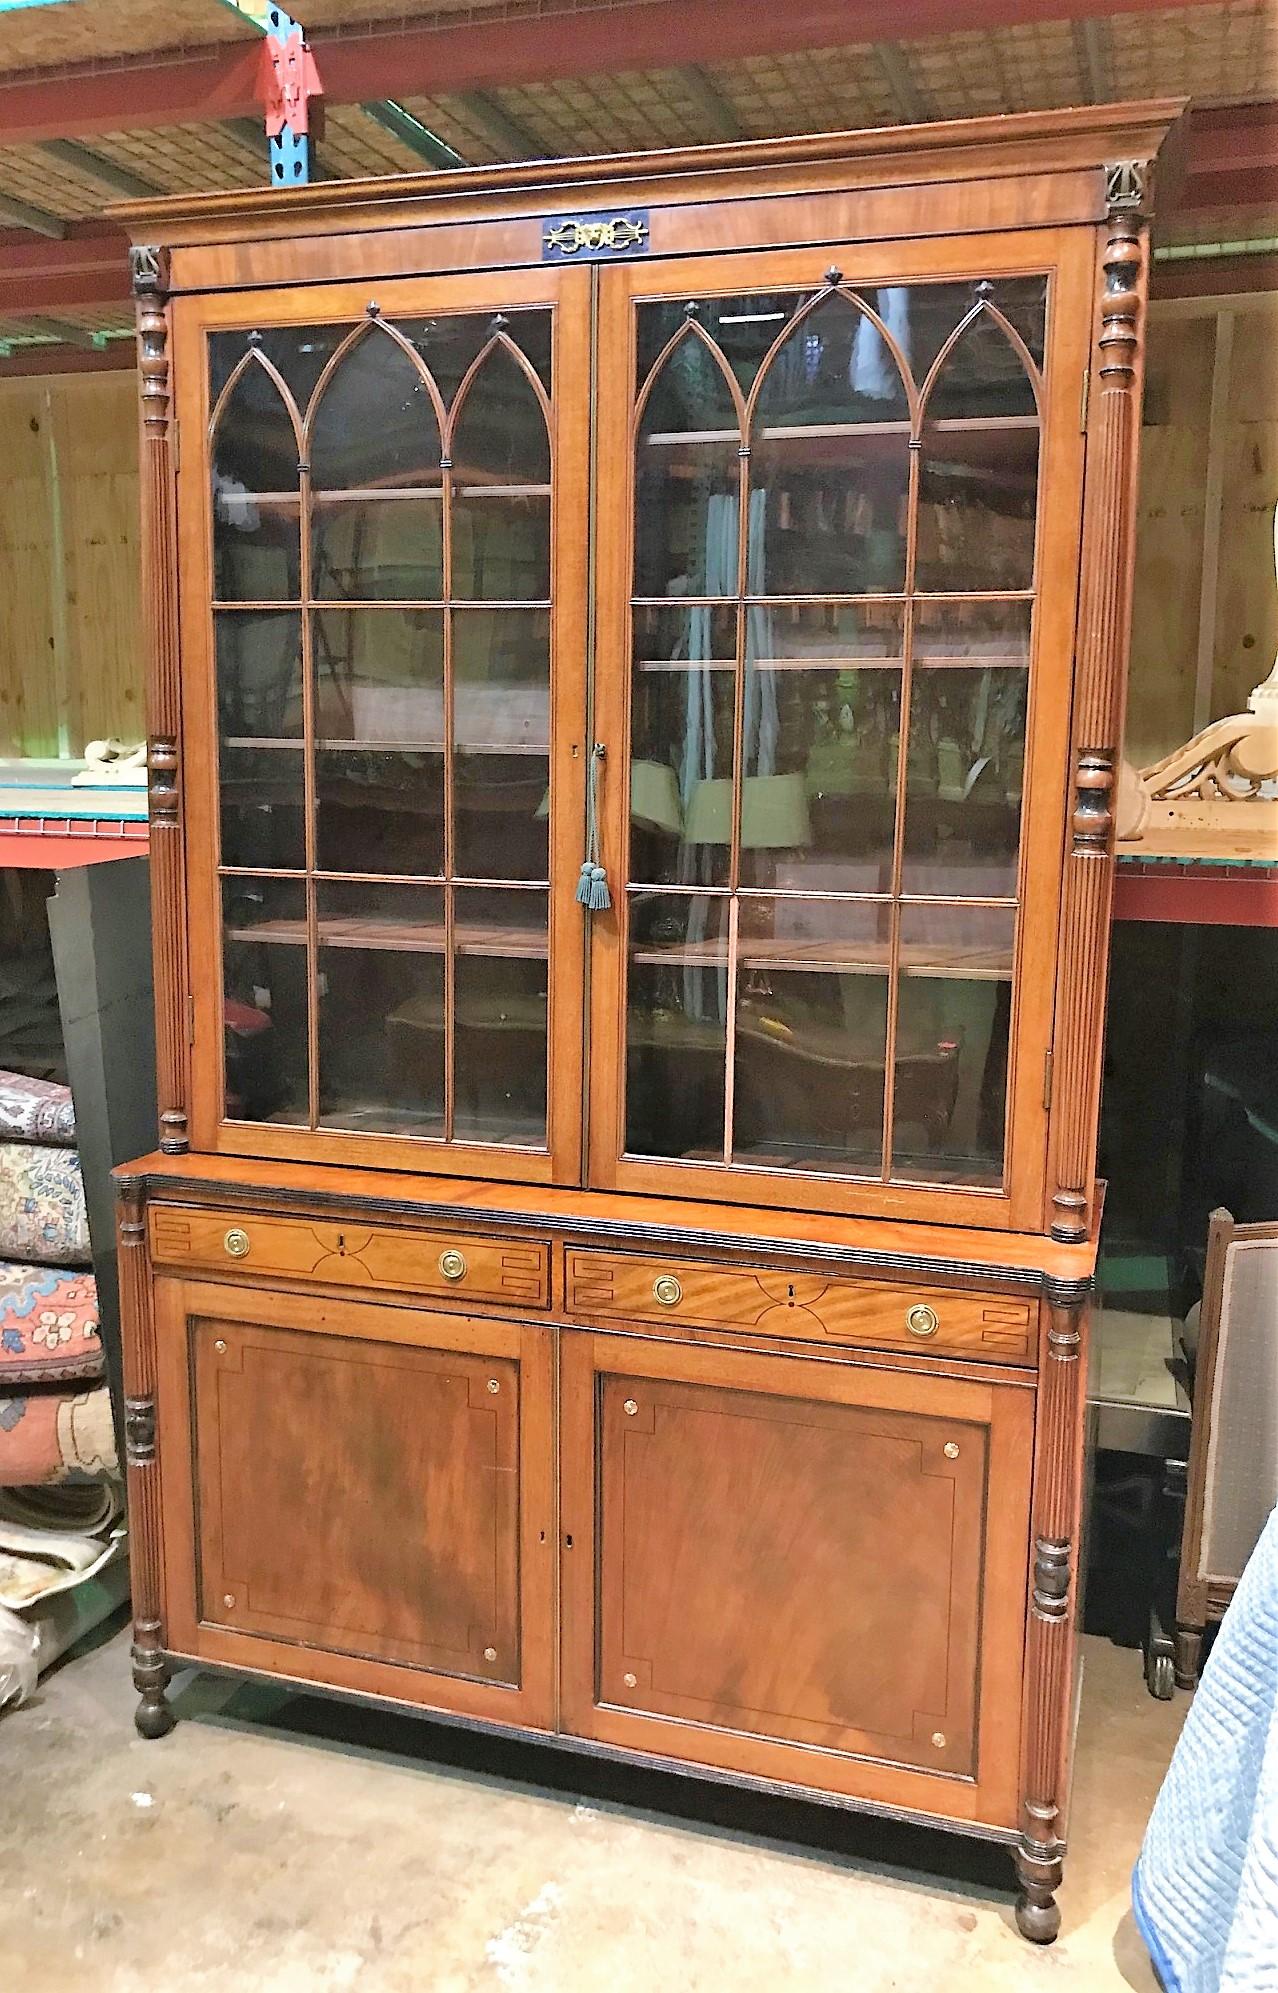 Outstanding 19th century English Sheraton bookcase or cabinet having a unique lion's head and harp accented cornice atop two glazed doors with arched astragal moldings. The lower section fitted with two drawers and cupboards featuring flame mahogany